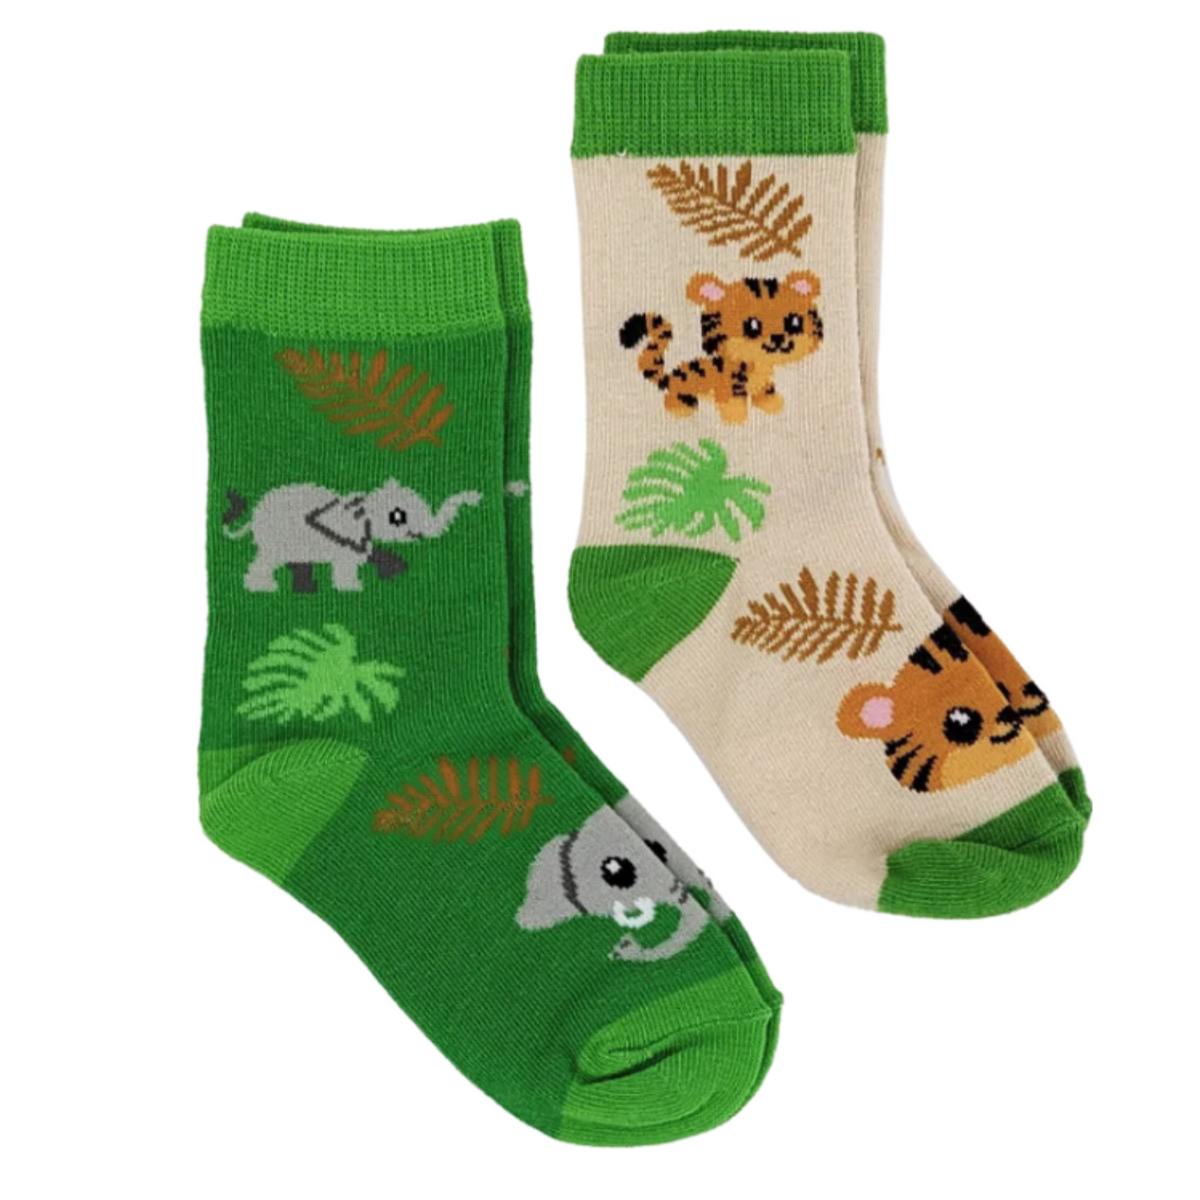 Sock Harbor Safari 2-pack kids&#39; crew socks featuring green sock with elephants and beige sock with leopards. Socks shown laying flat on display.